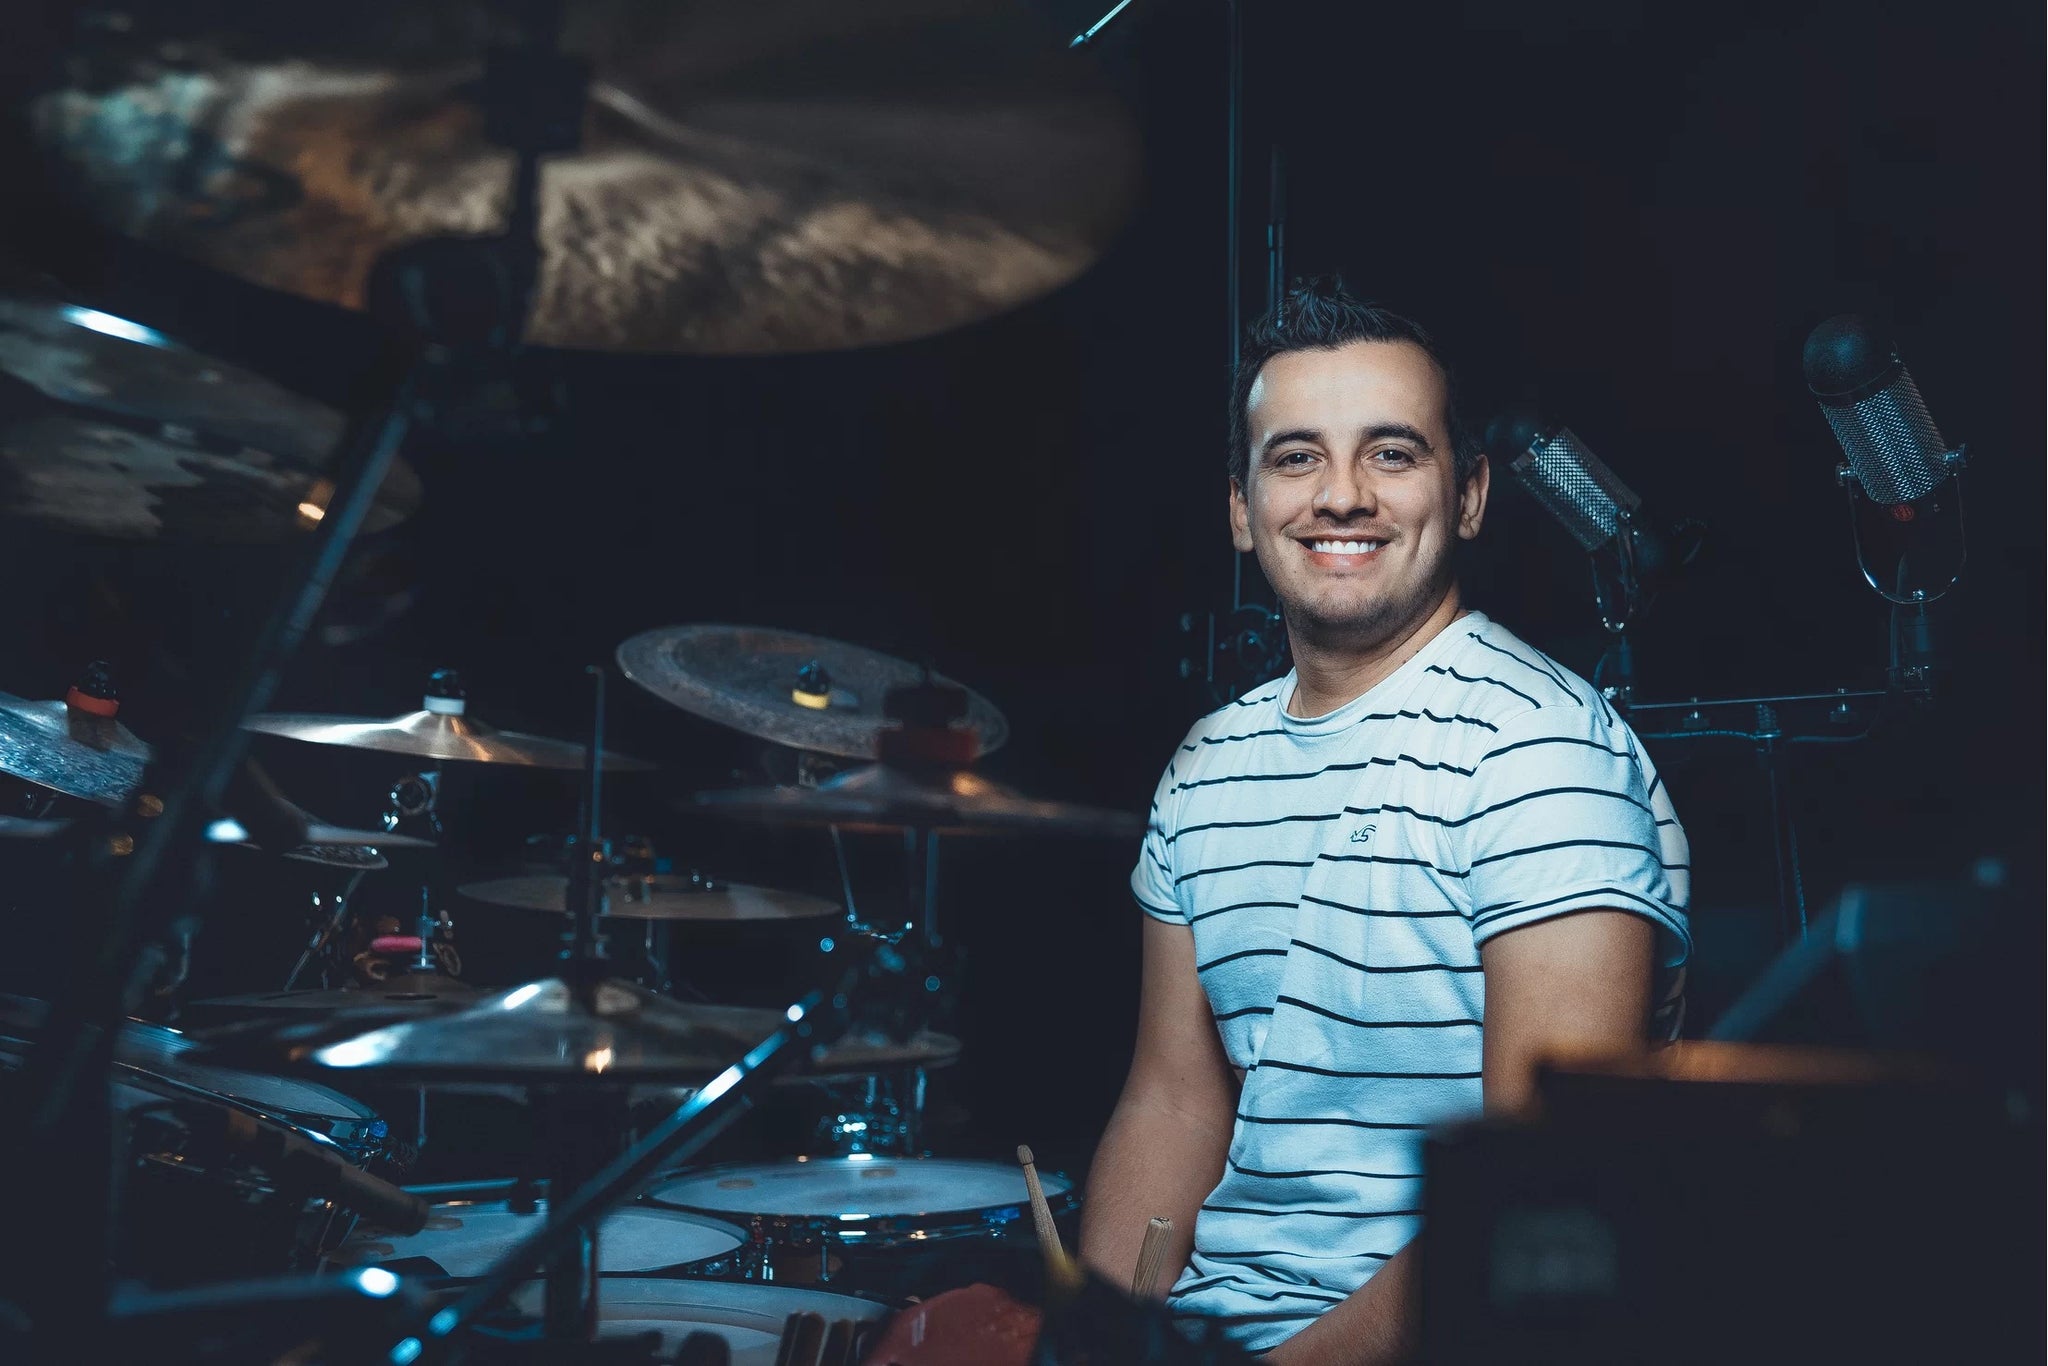 Jason Castellanos is a Columbian drummer based in Dubai. He is the resident drummer for the number 1 show in the Middle East, La Perle by Dragone. He spends his off time recording drums and music production from his home studio.